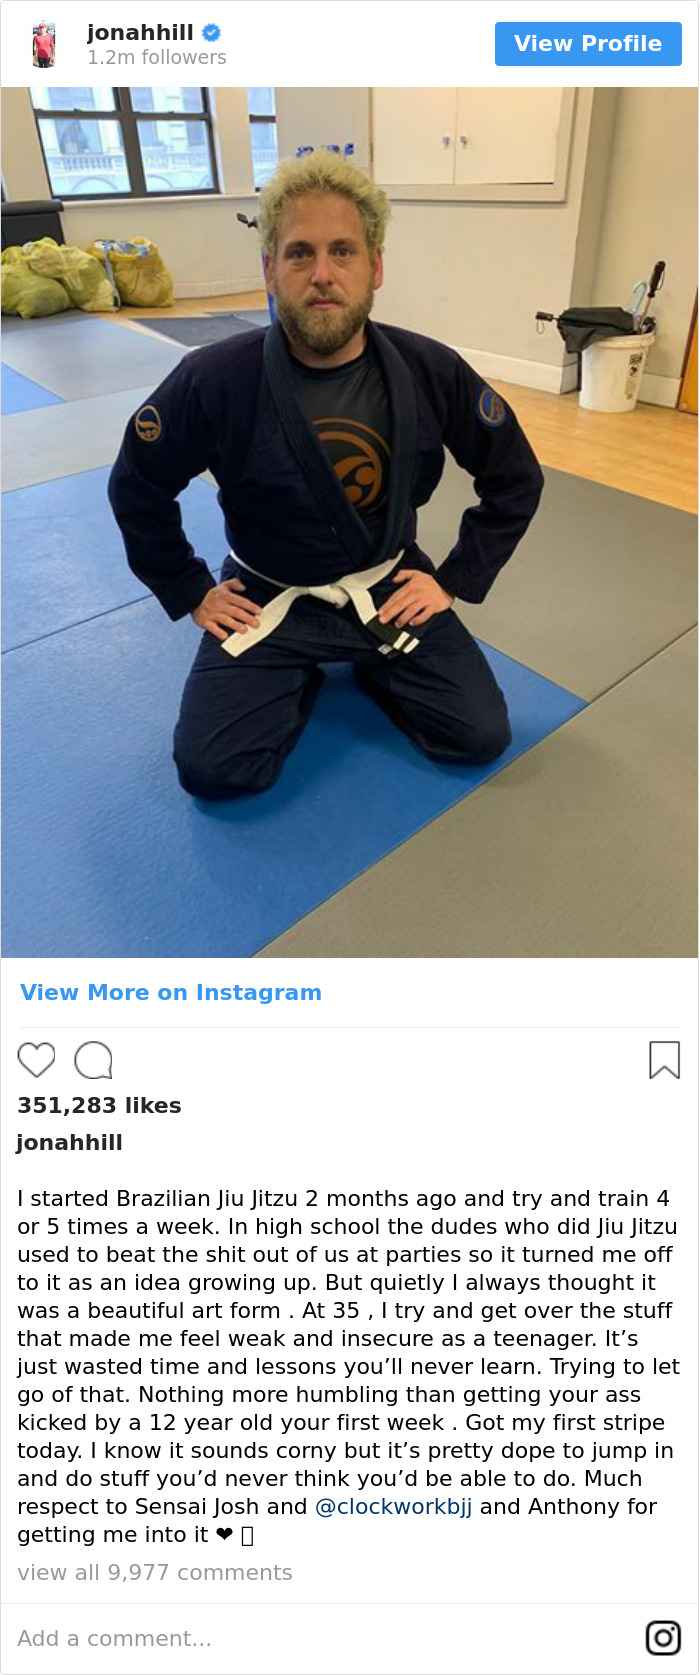 Jonah Hill Is Becoming More Fit As He Overcomes His Past Insecurities With The Help Of Jiu-Jitsu